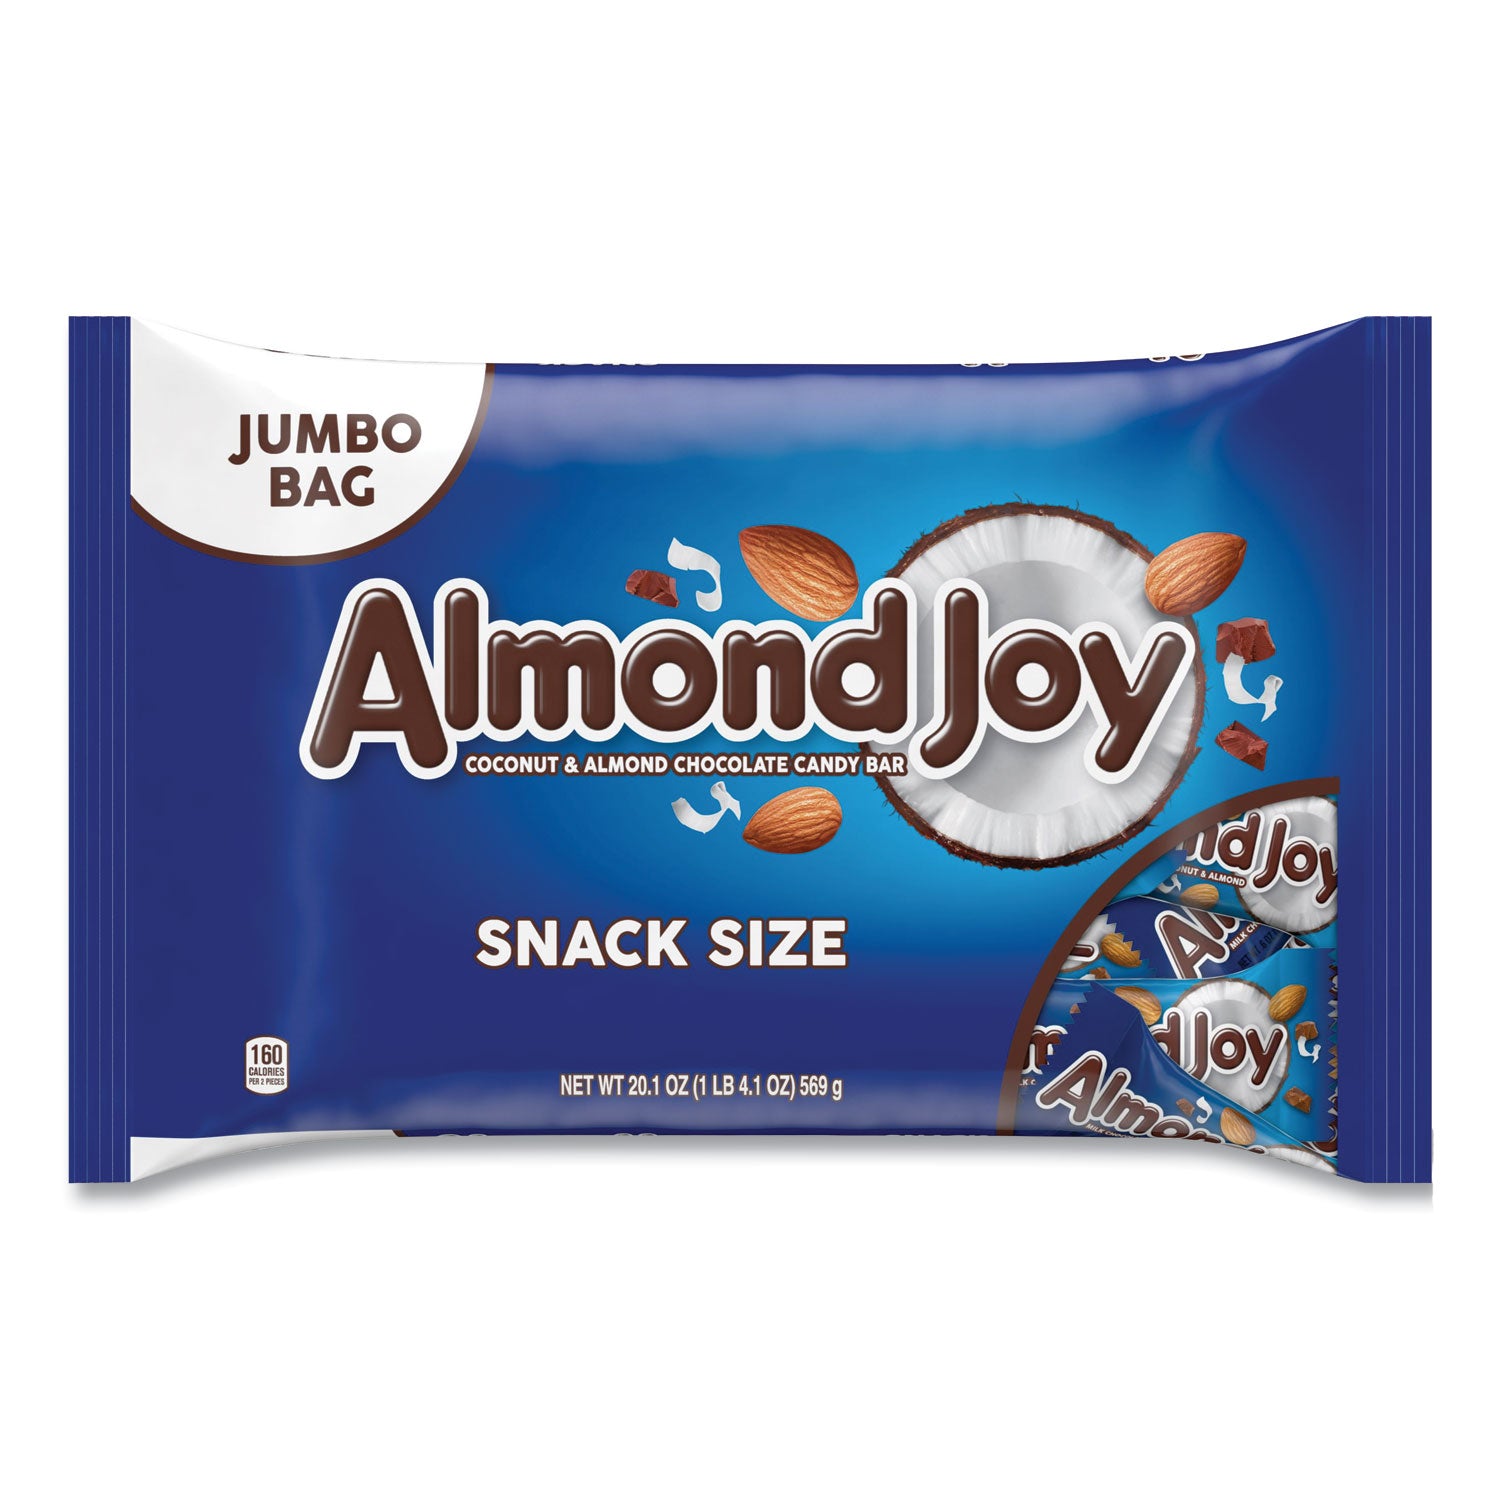 snack-size-candy-bars-201-oz-bag-2-carton-ships-in-1-3-business-days_grr24600348 - 1